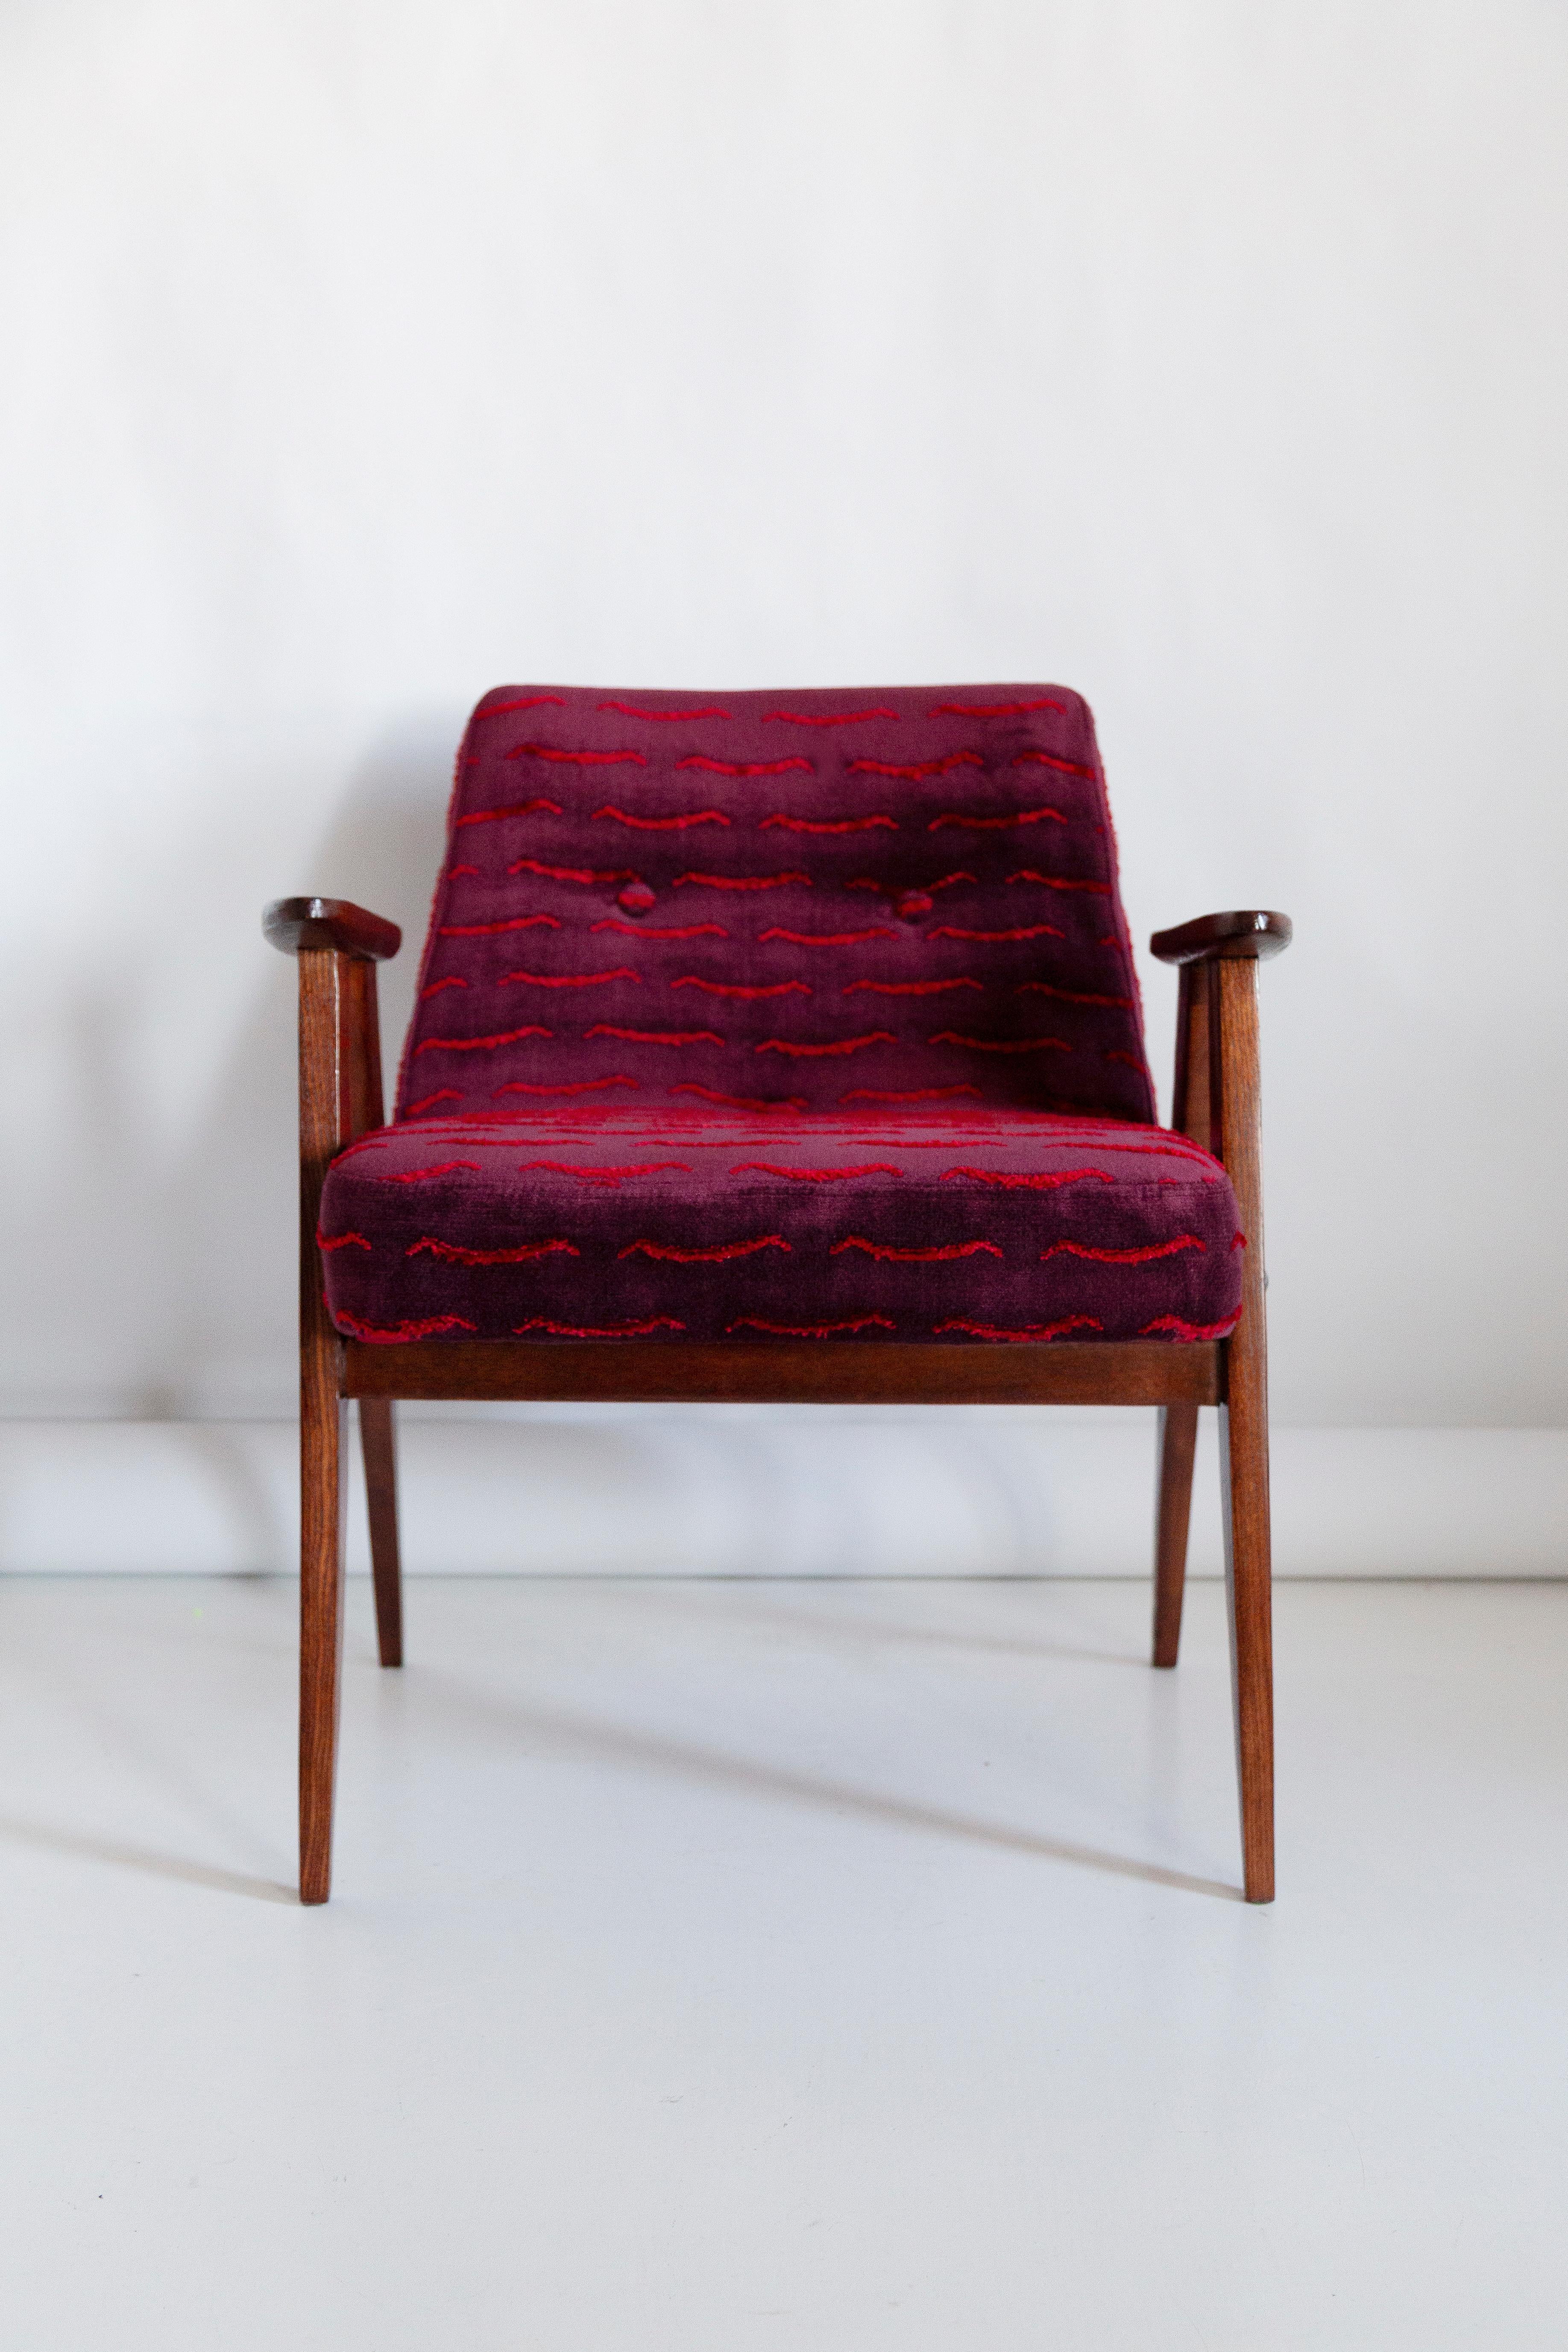 Polish Mid-Century 366 Armchair, Dark Red Velvet, by Jozef Chierowski, Europe, 1960s For Sale